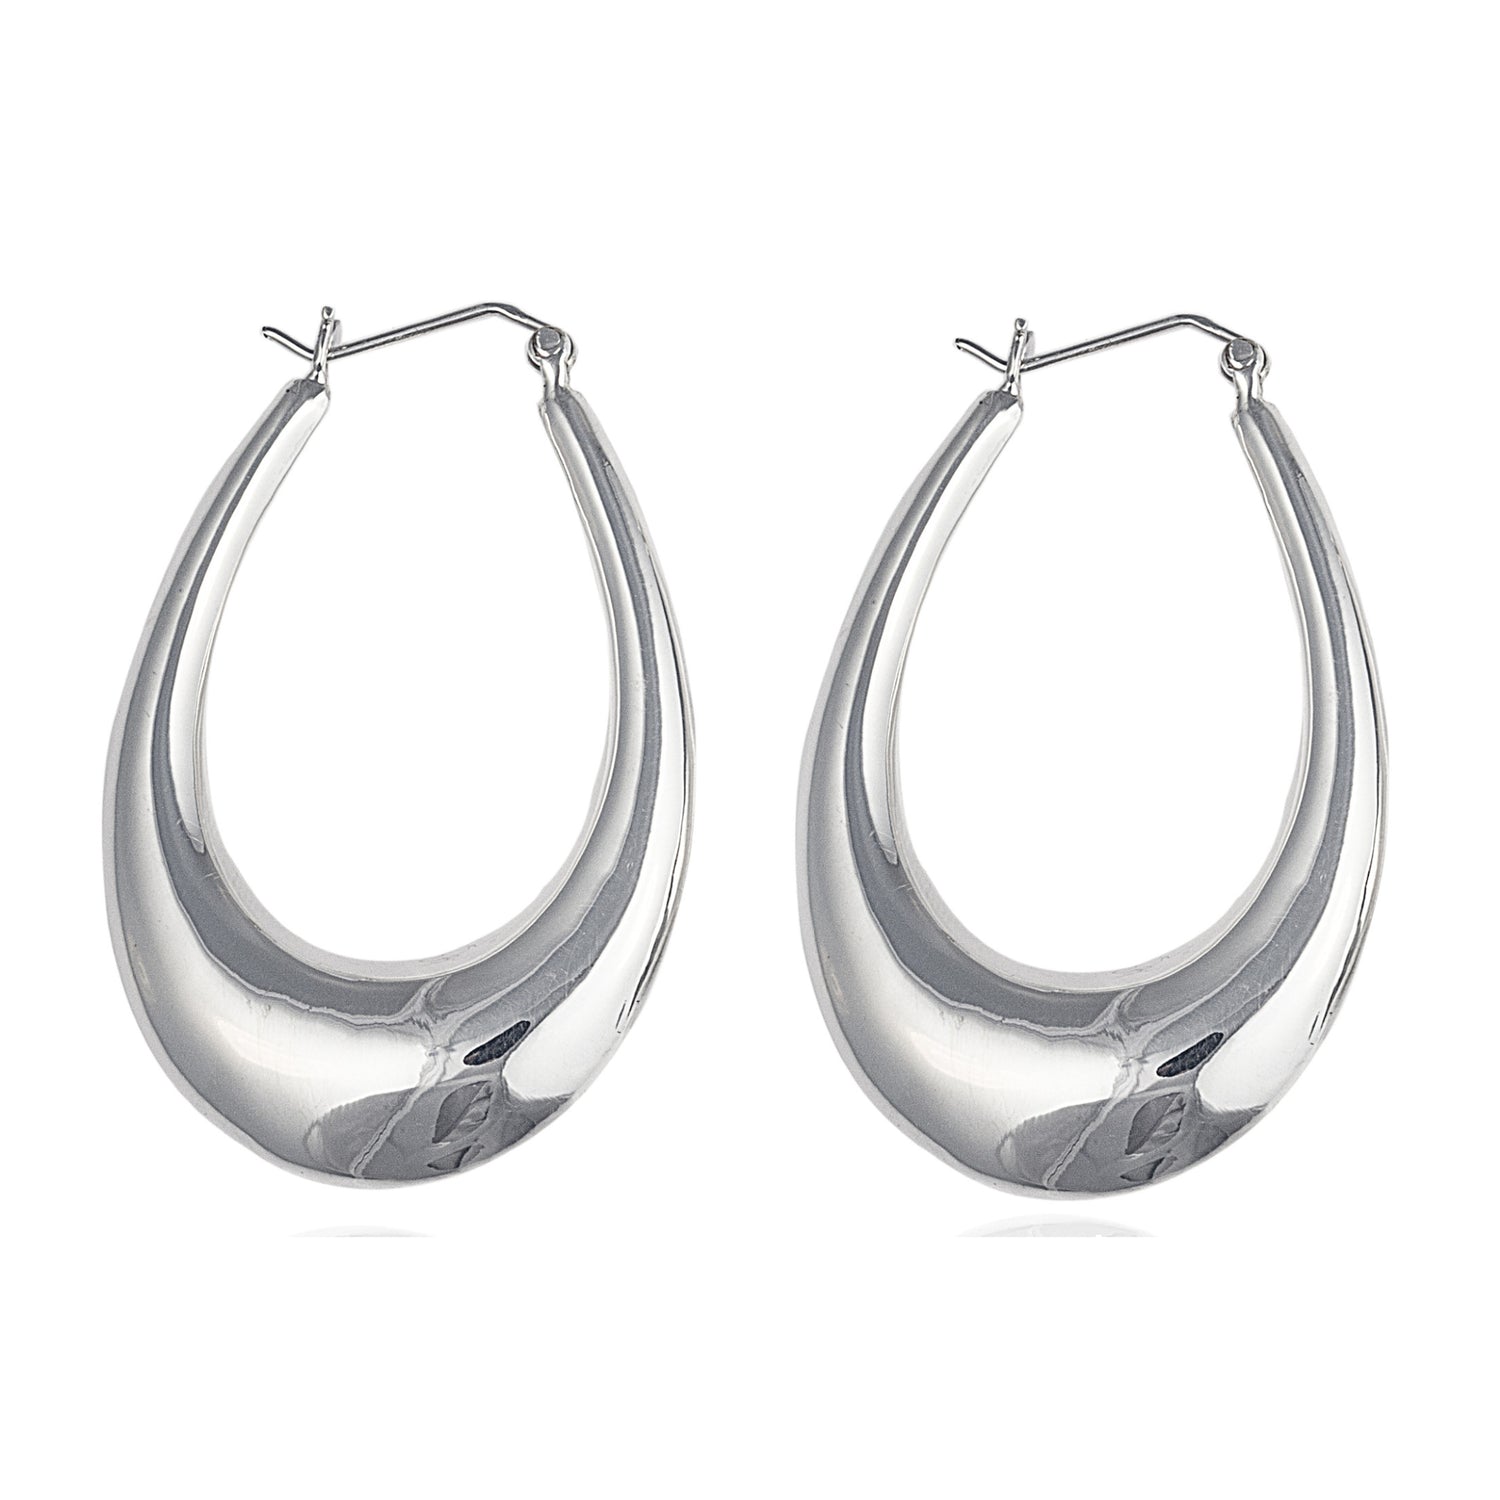 The Angel Hoop earrings are made of 925 sterling silver and are supremely comfortable to wear. The versatile Aztec design can be dressed both up or dressed down for a more casual look. Worldwide shipping.